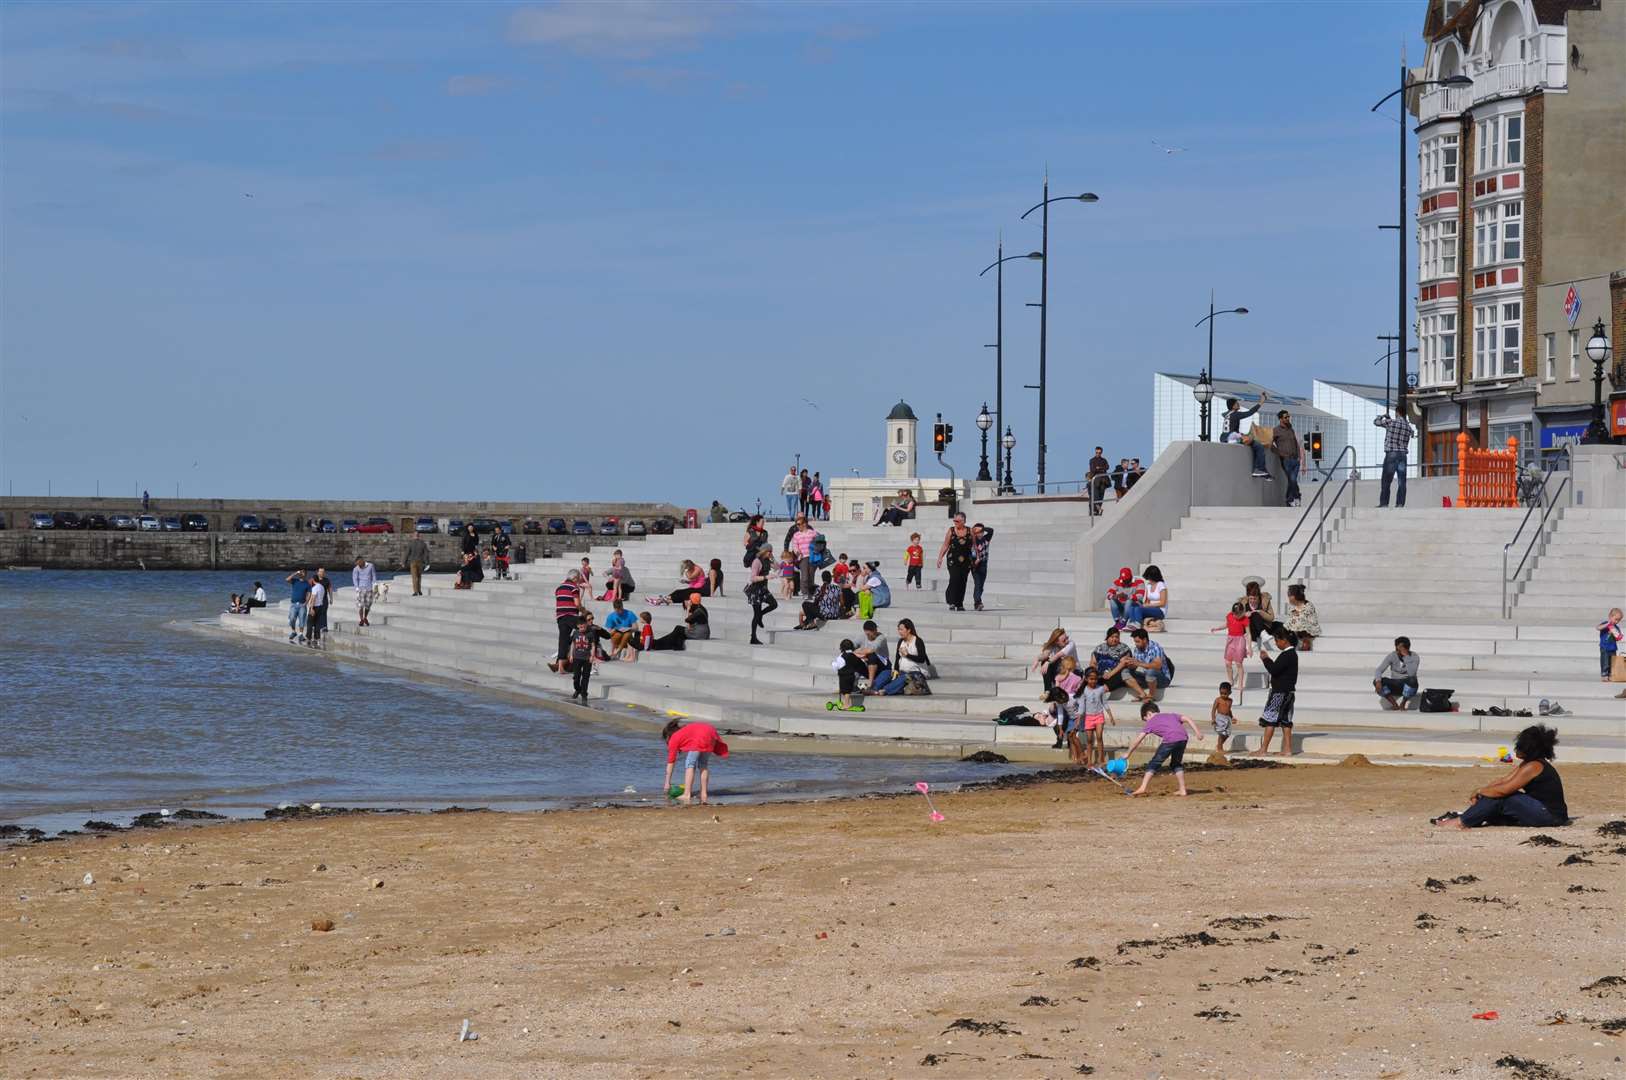 The vigil will be held at the steps in Margate's Old Town. Picture: Geoff Orton